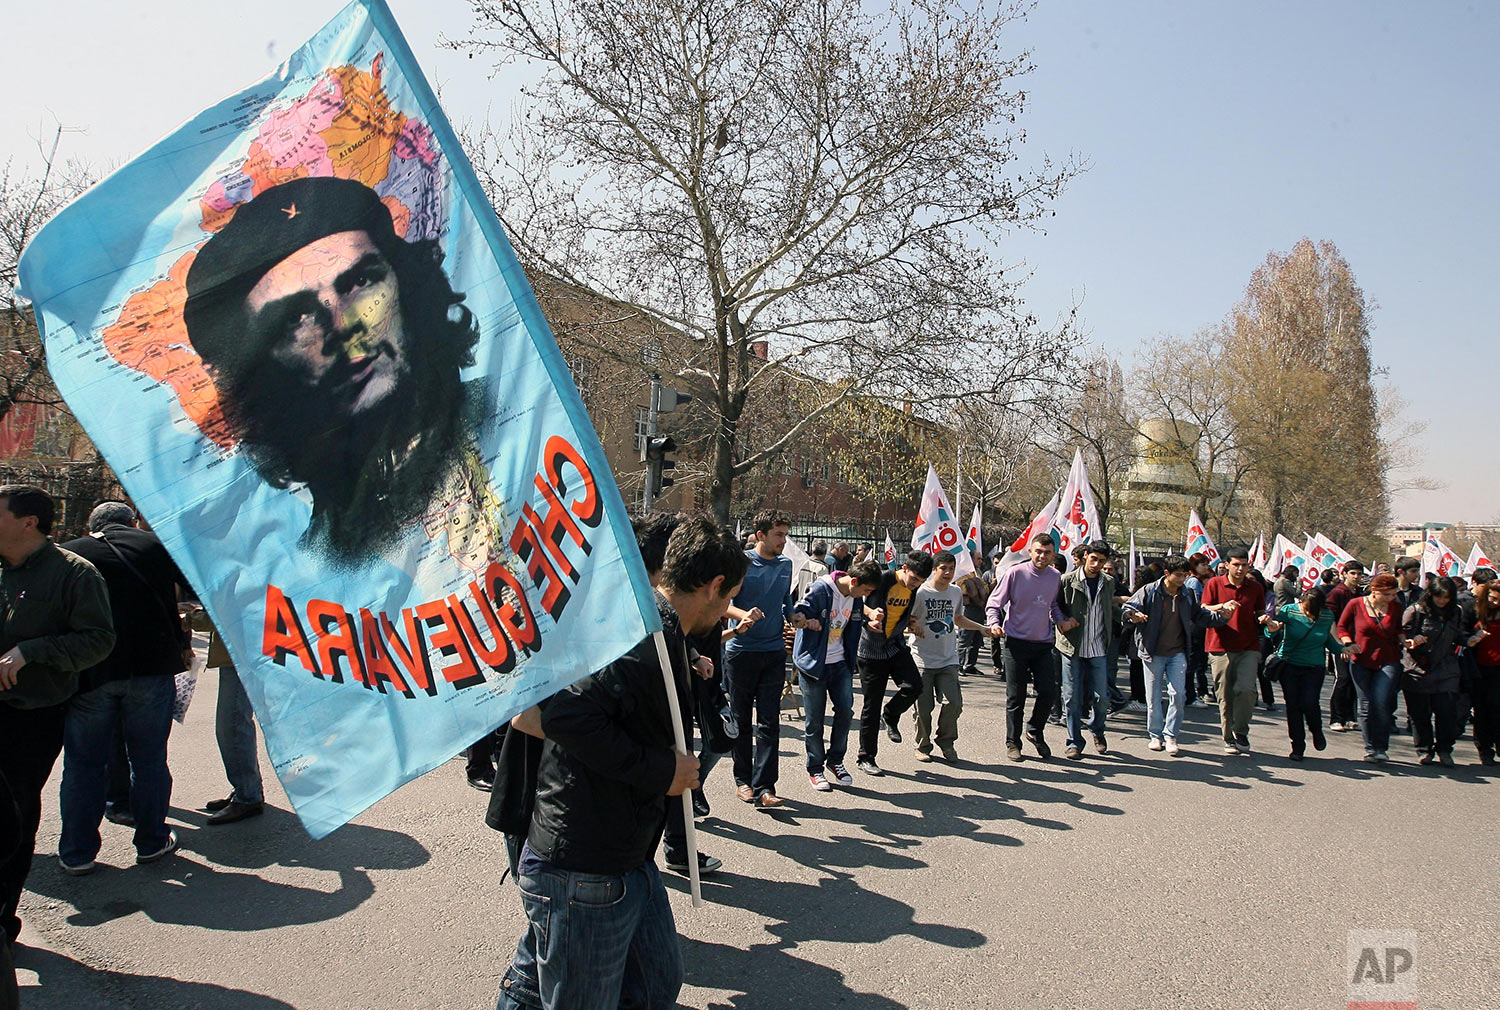  Turkish students demonstrate as one of them waves a flag with a poster of Latin American revolutionary legend Che Guevara during a protest rally against NATO and U. S. President Barack Obama, in Ankara, Turkey, Saturday, April 4, 2009. (AP Photo/Bur